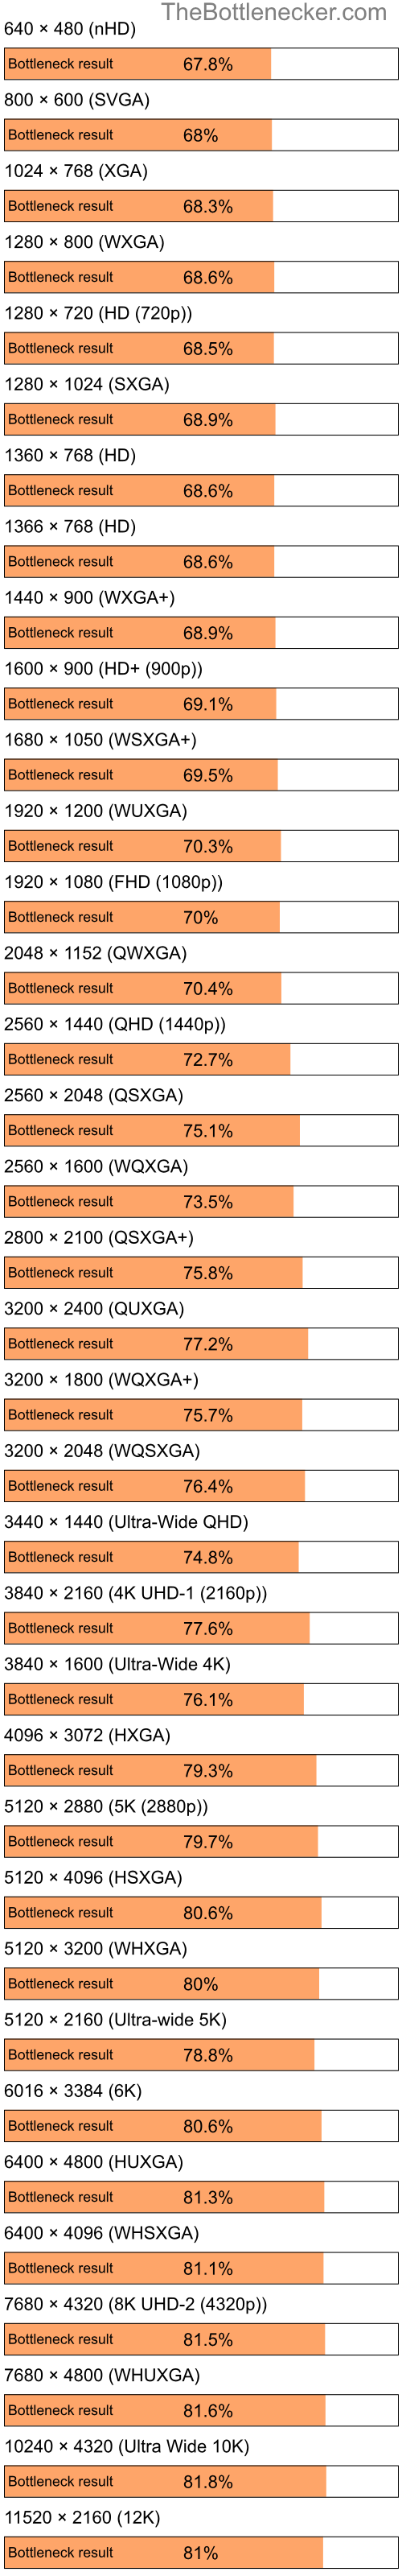 Bottleneck results by resolution for Intel Pentium 4 and NVIDIA GeForce 7025 in Processor Intense Tasks